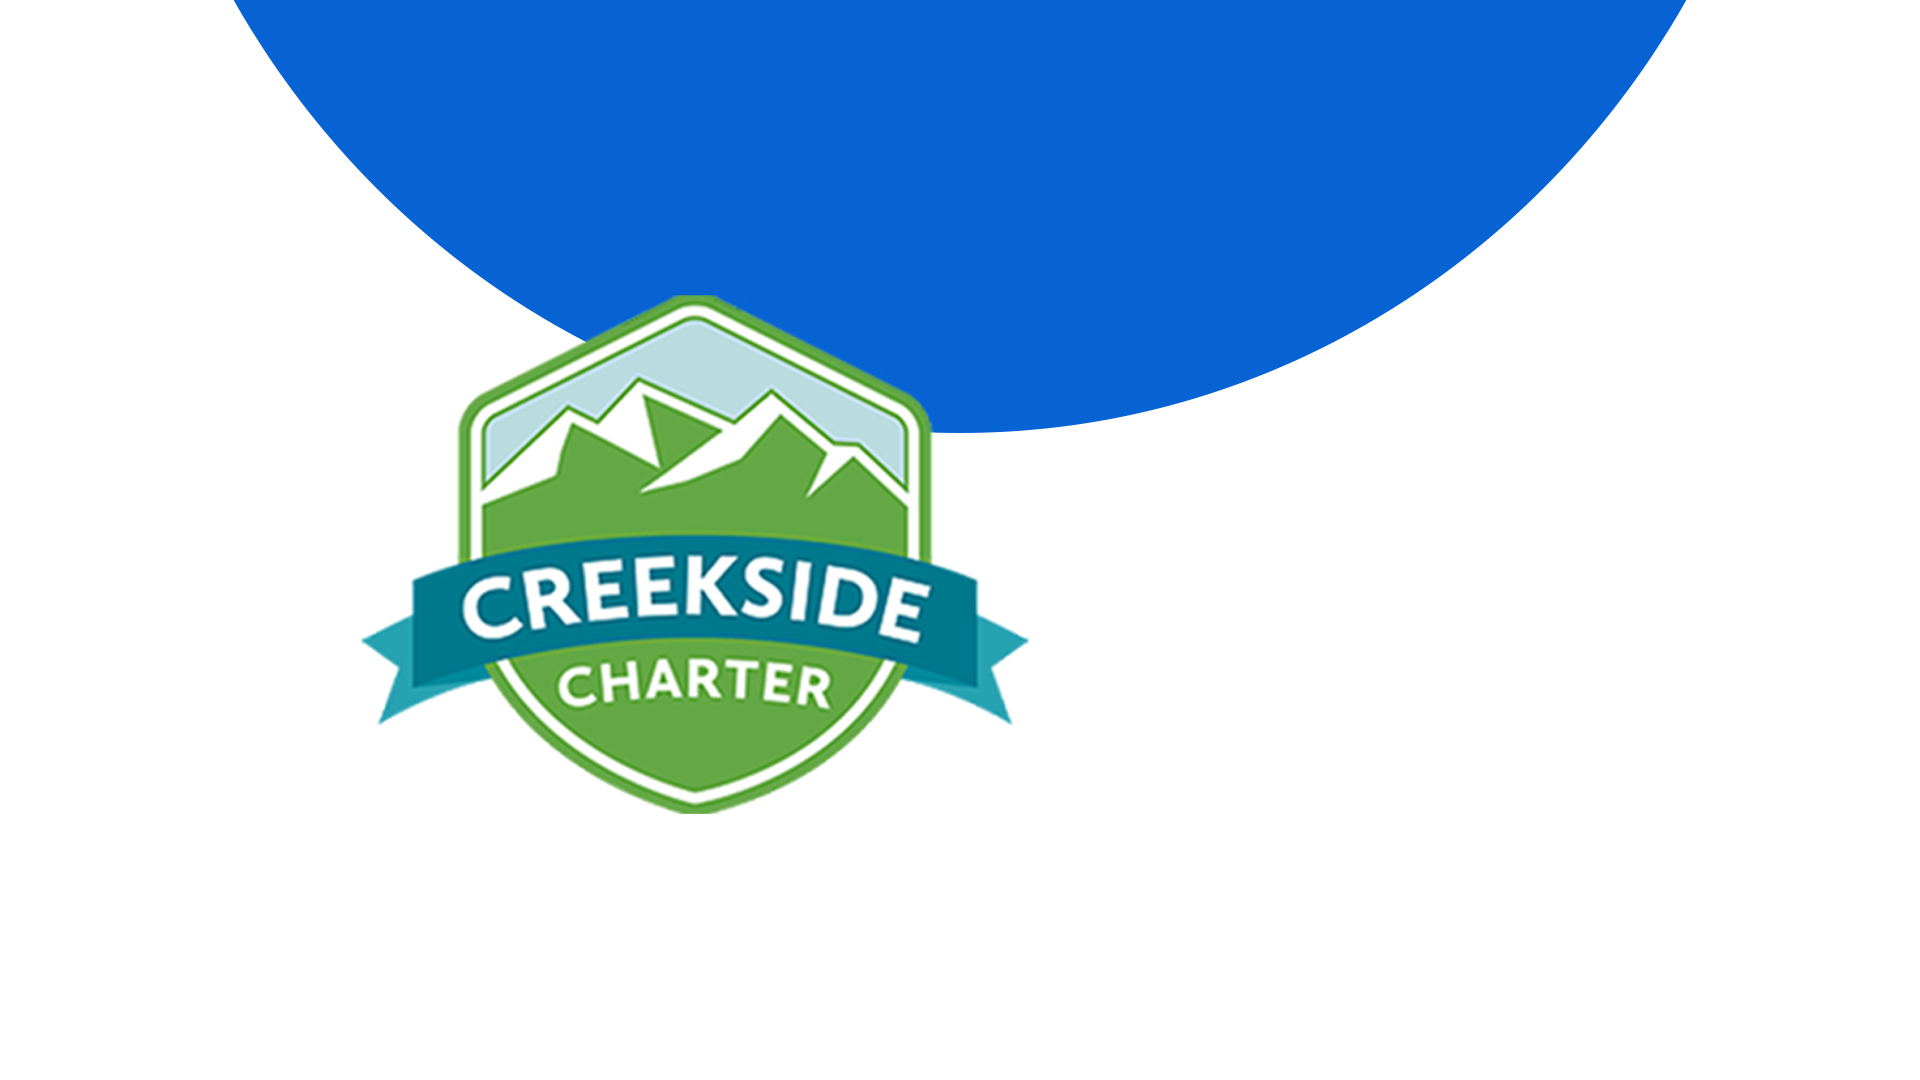 Creekside Charter Schools Focus On The Whole Child Is A True Driver Of Success